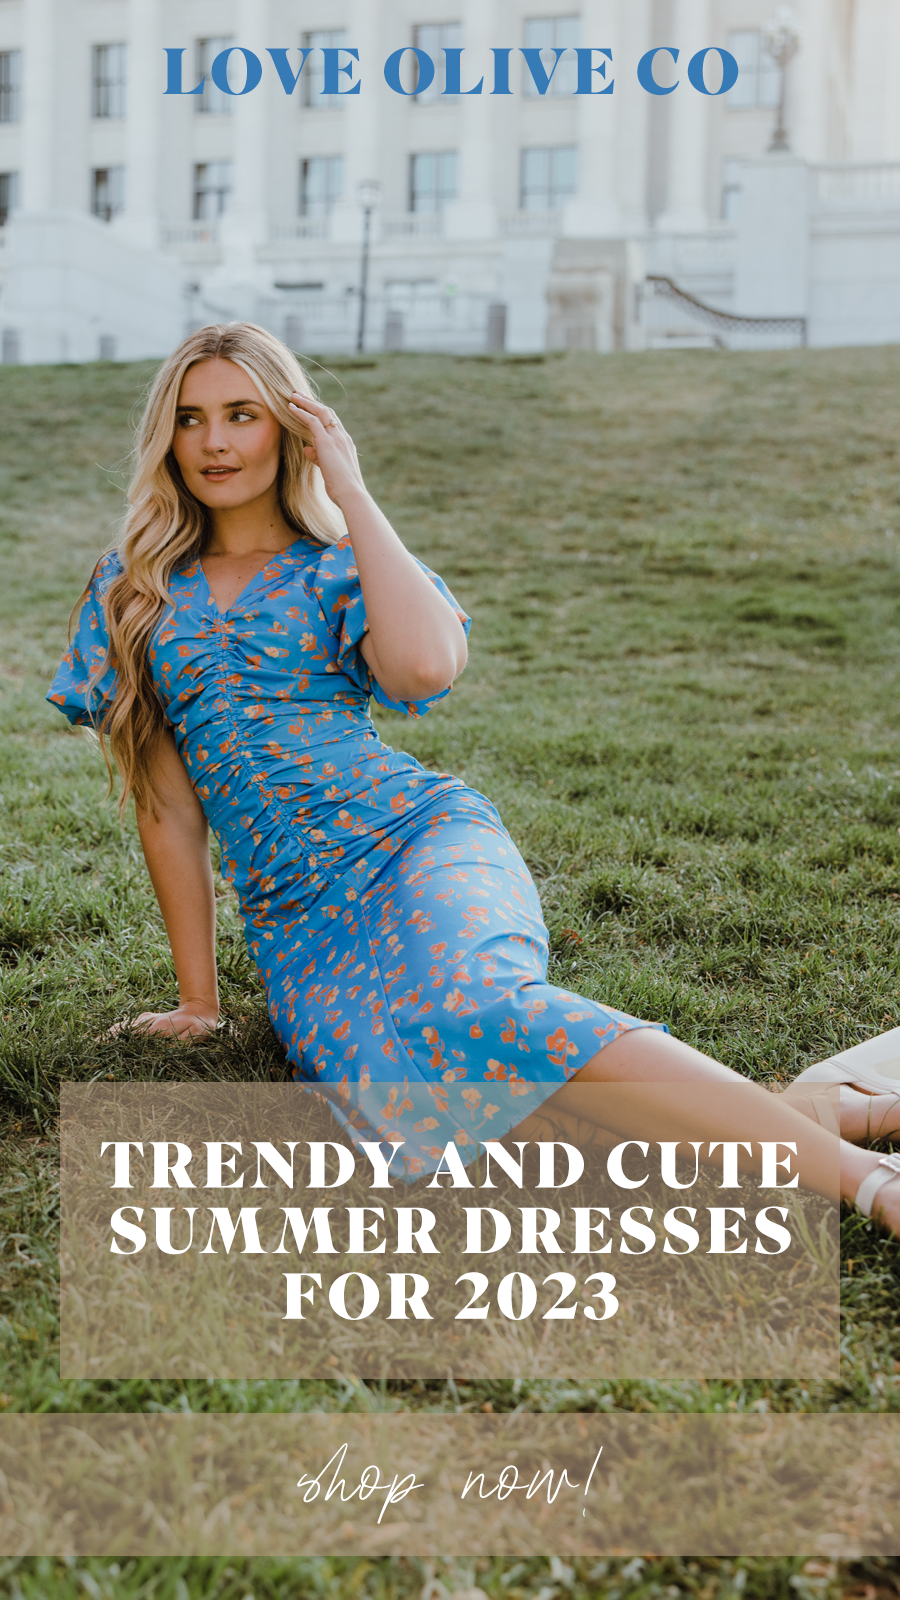 Trendy and Cute Summer Dresses for 2023